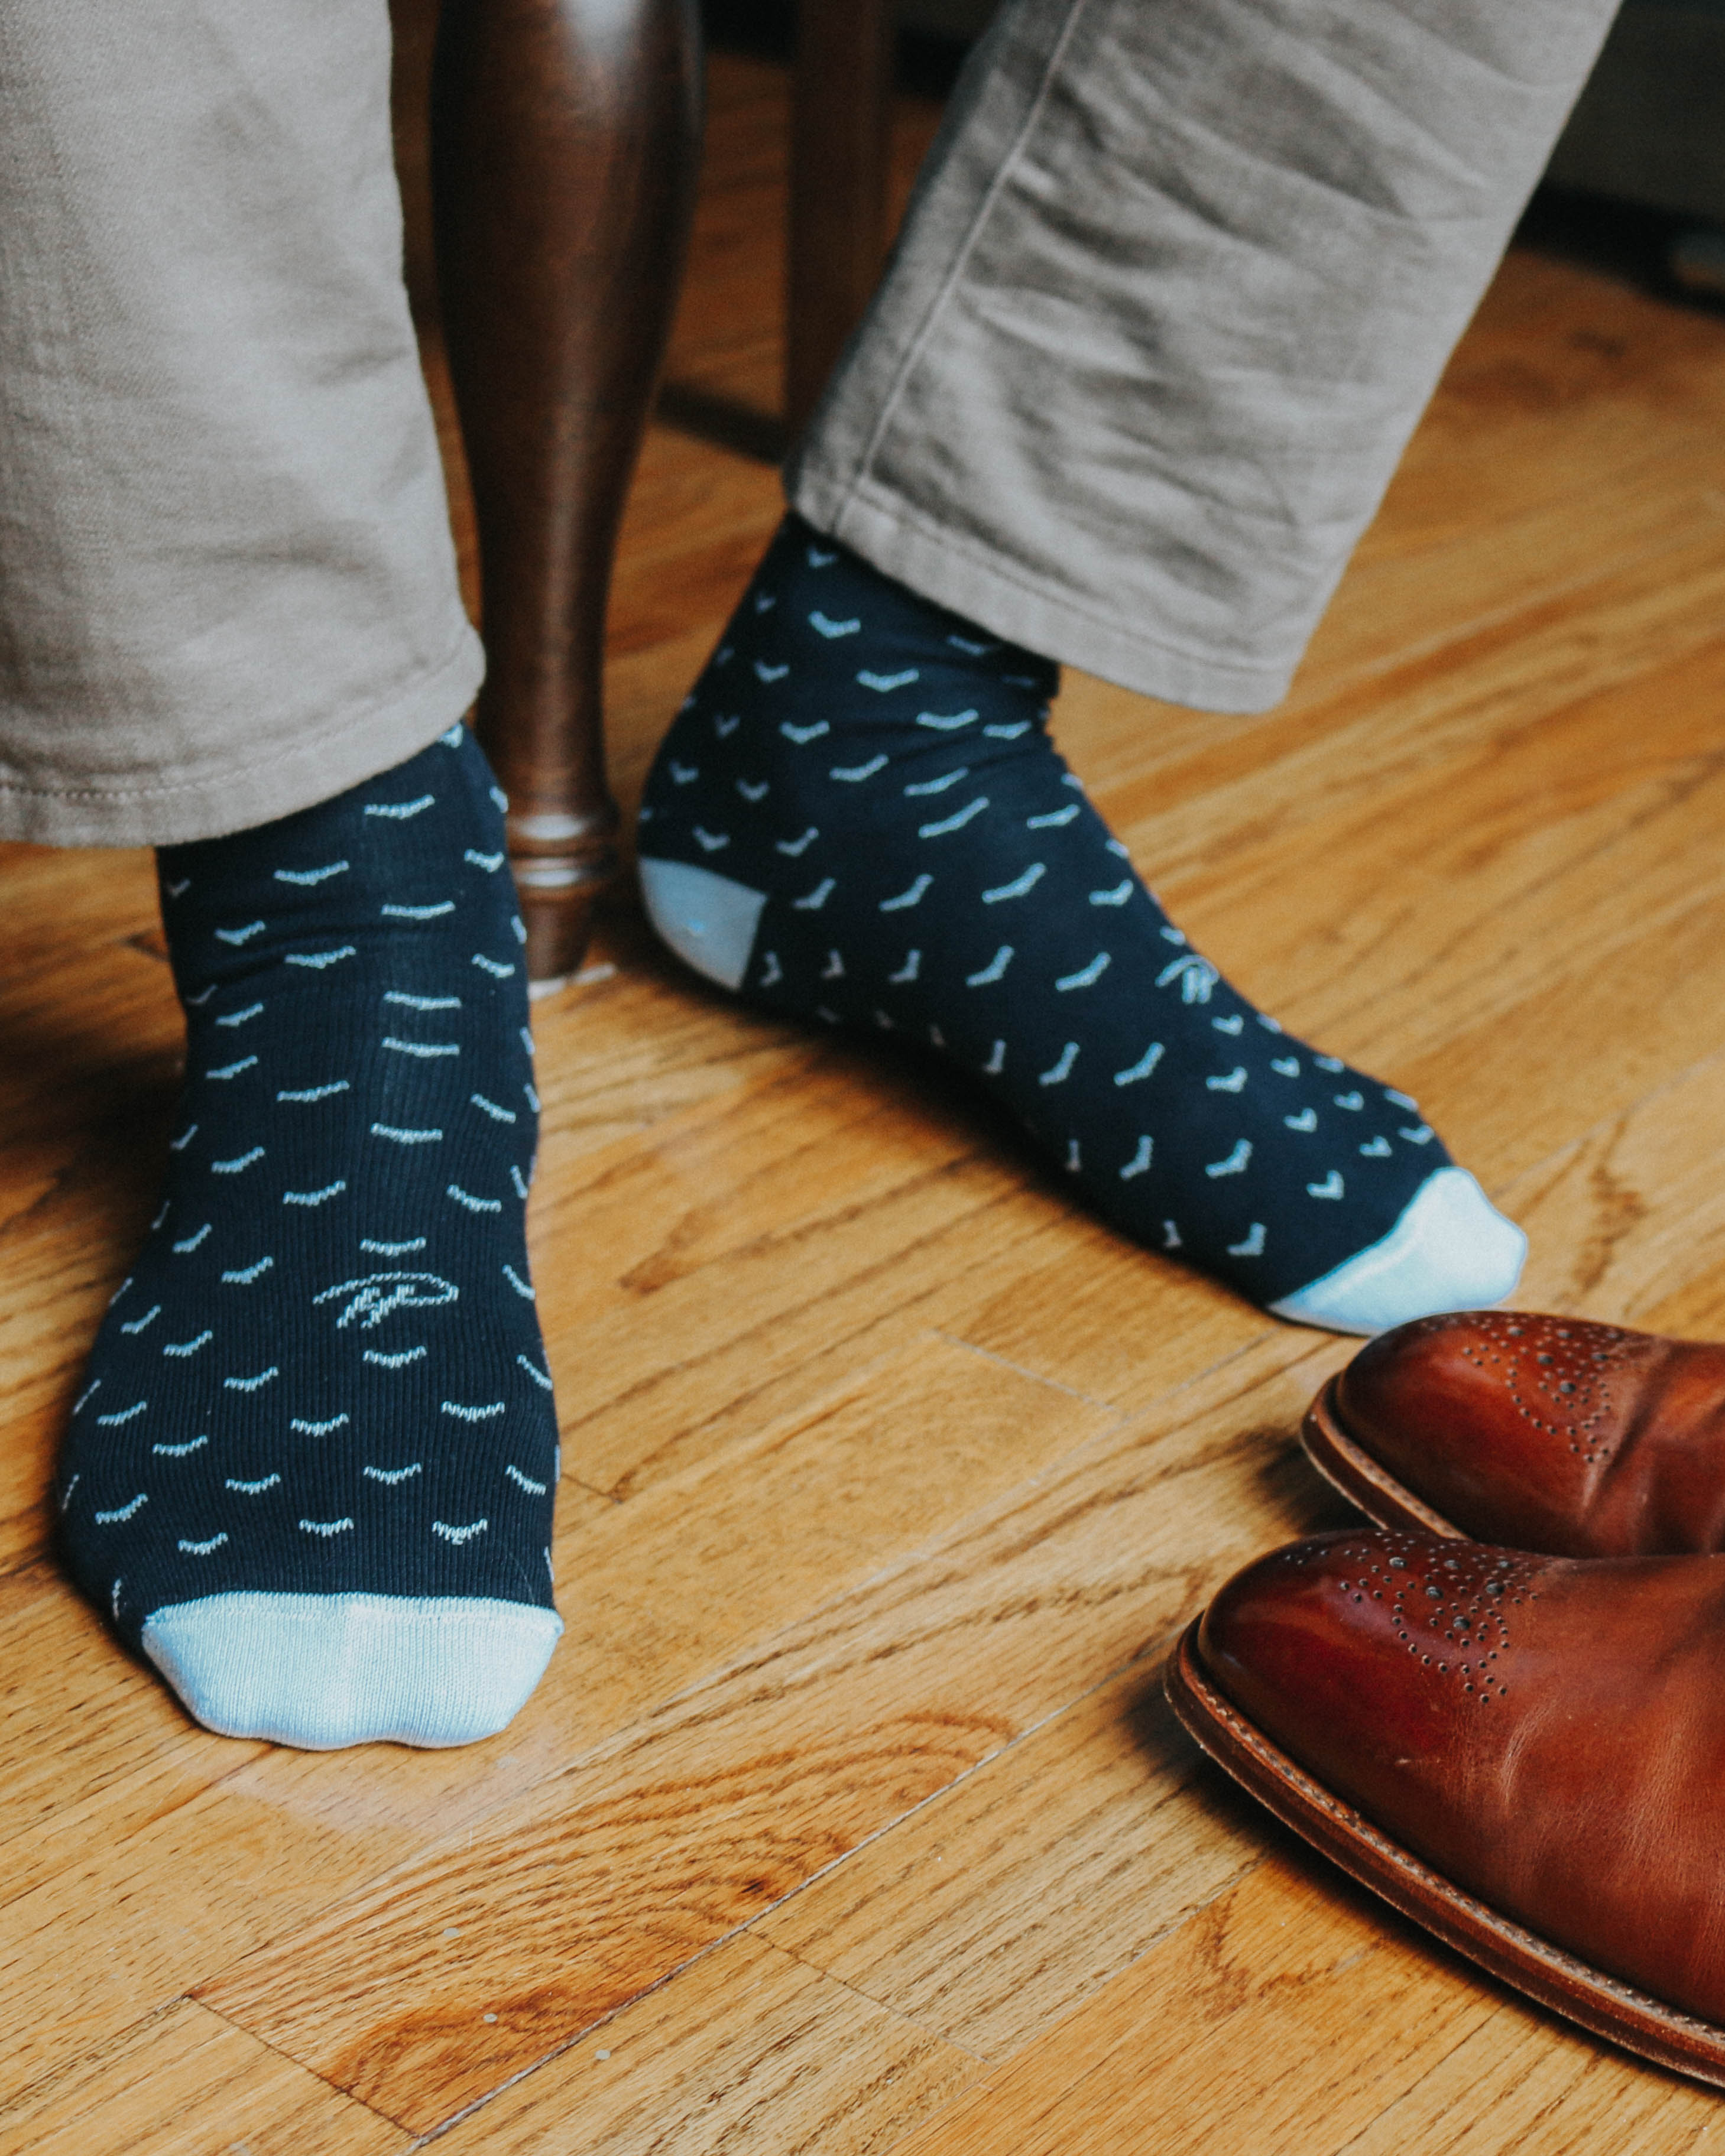 blue over the calf dress socks with light blue print, brown dress shoes, grey casual pants